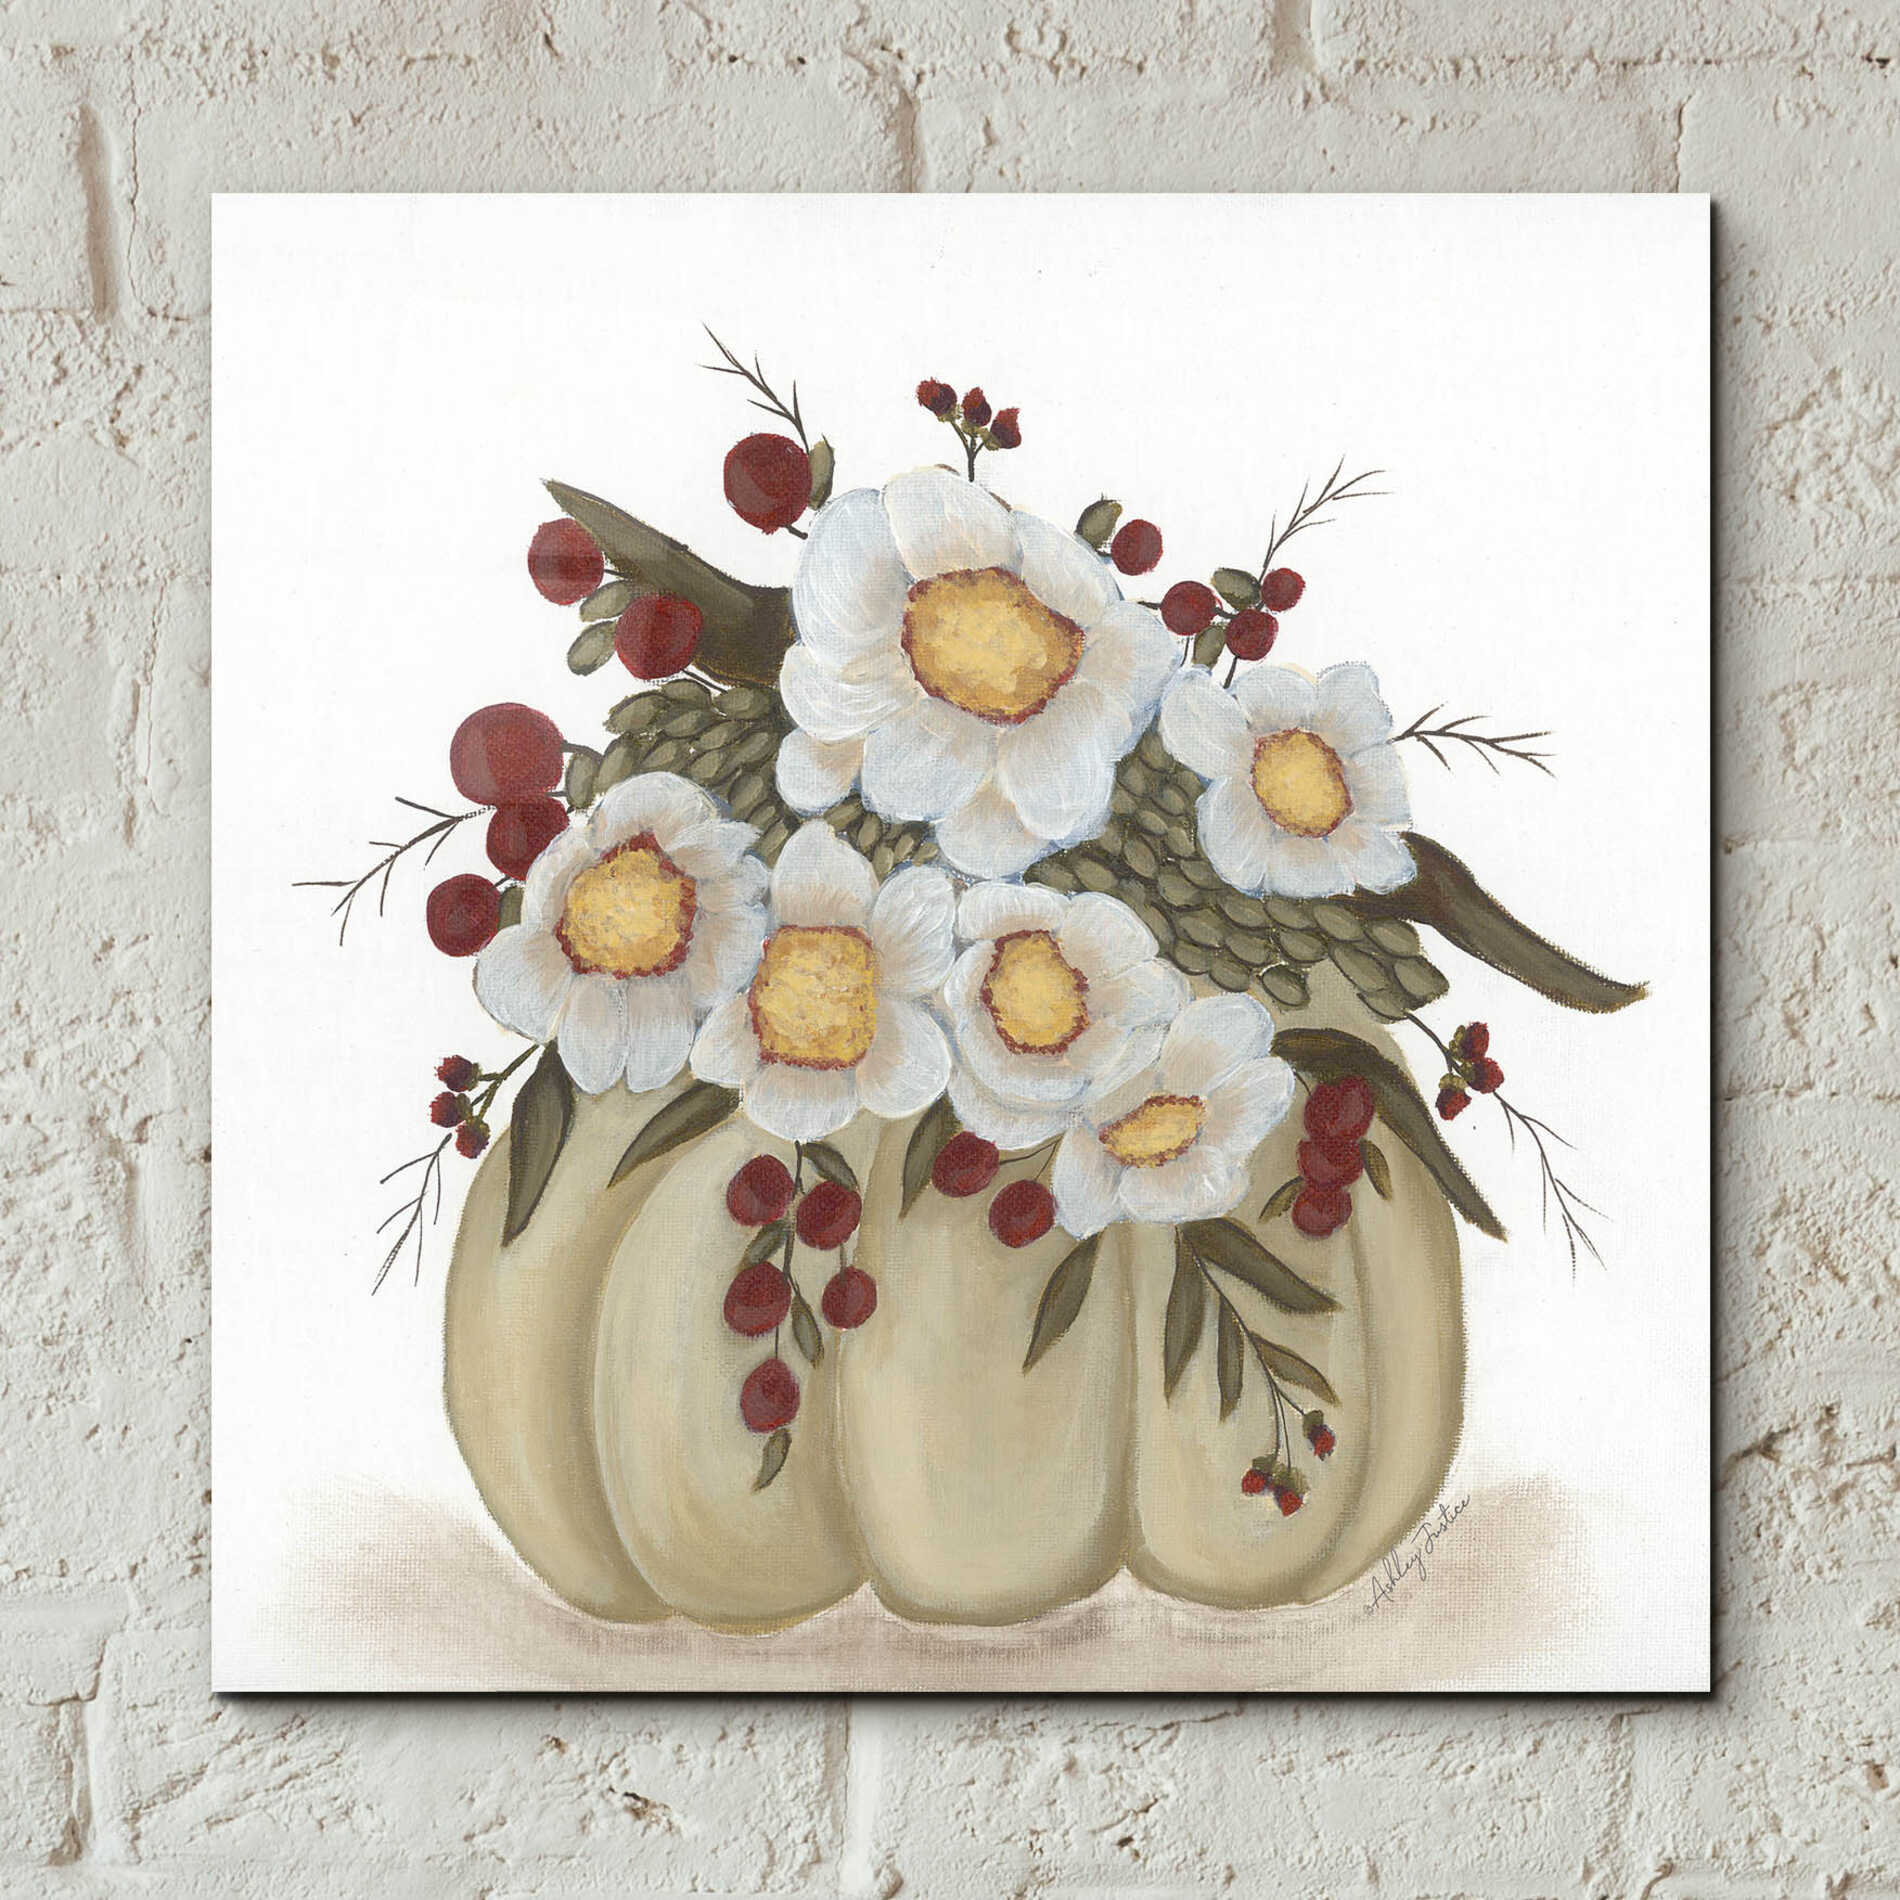 Epic Art 'Floral Pumpkin' by Ashley Justice, Acrylic Glass Wall Art,12x12